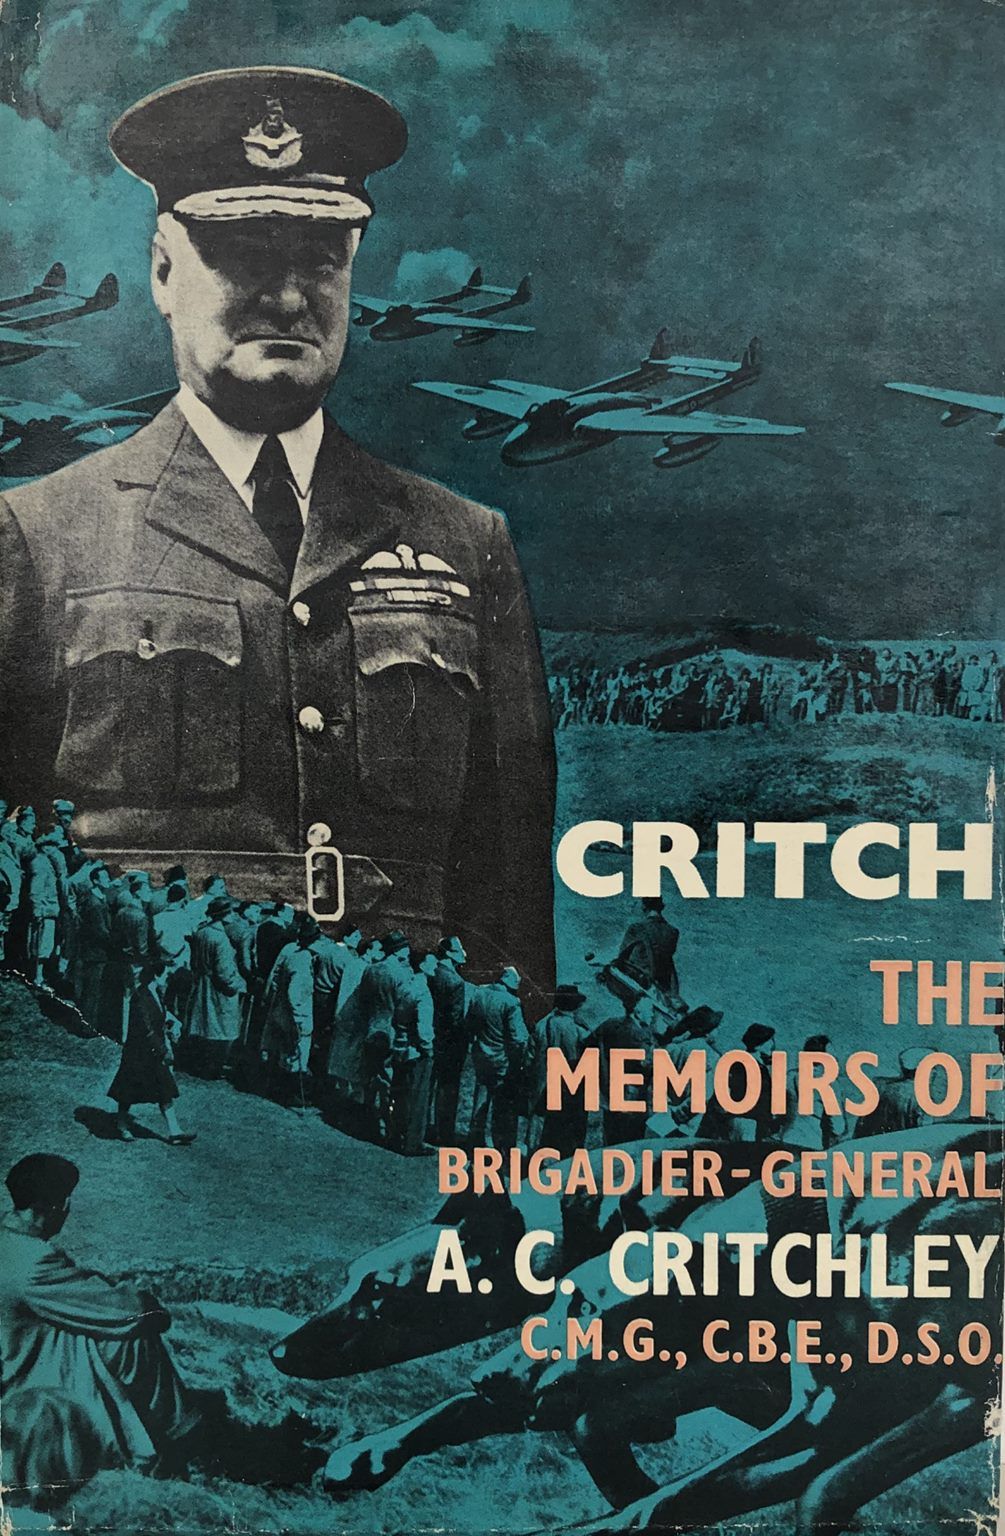 CRITCH: The Memoirs of Brigadier General A. C. Critchley